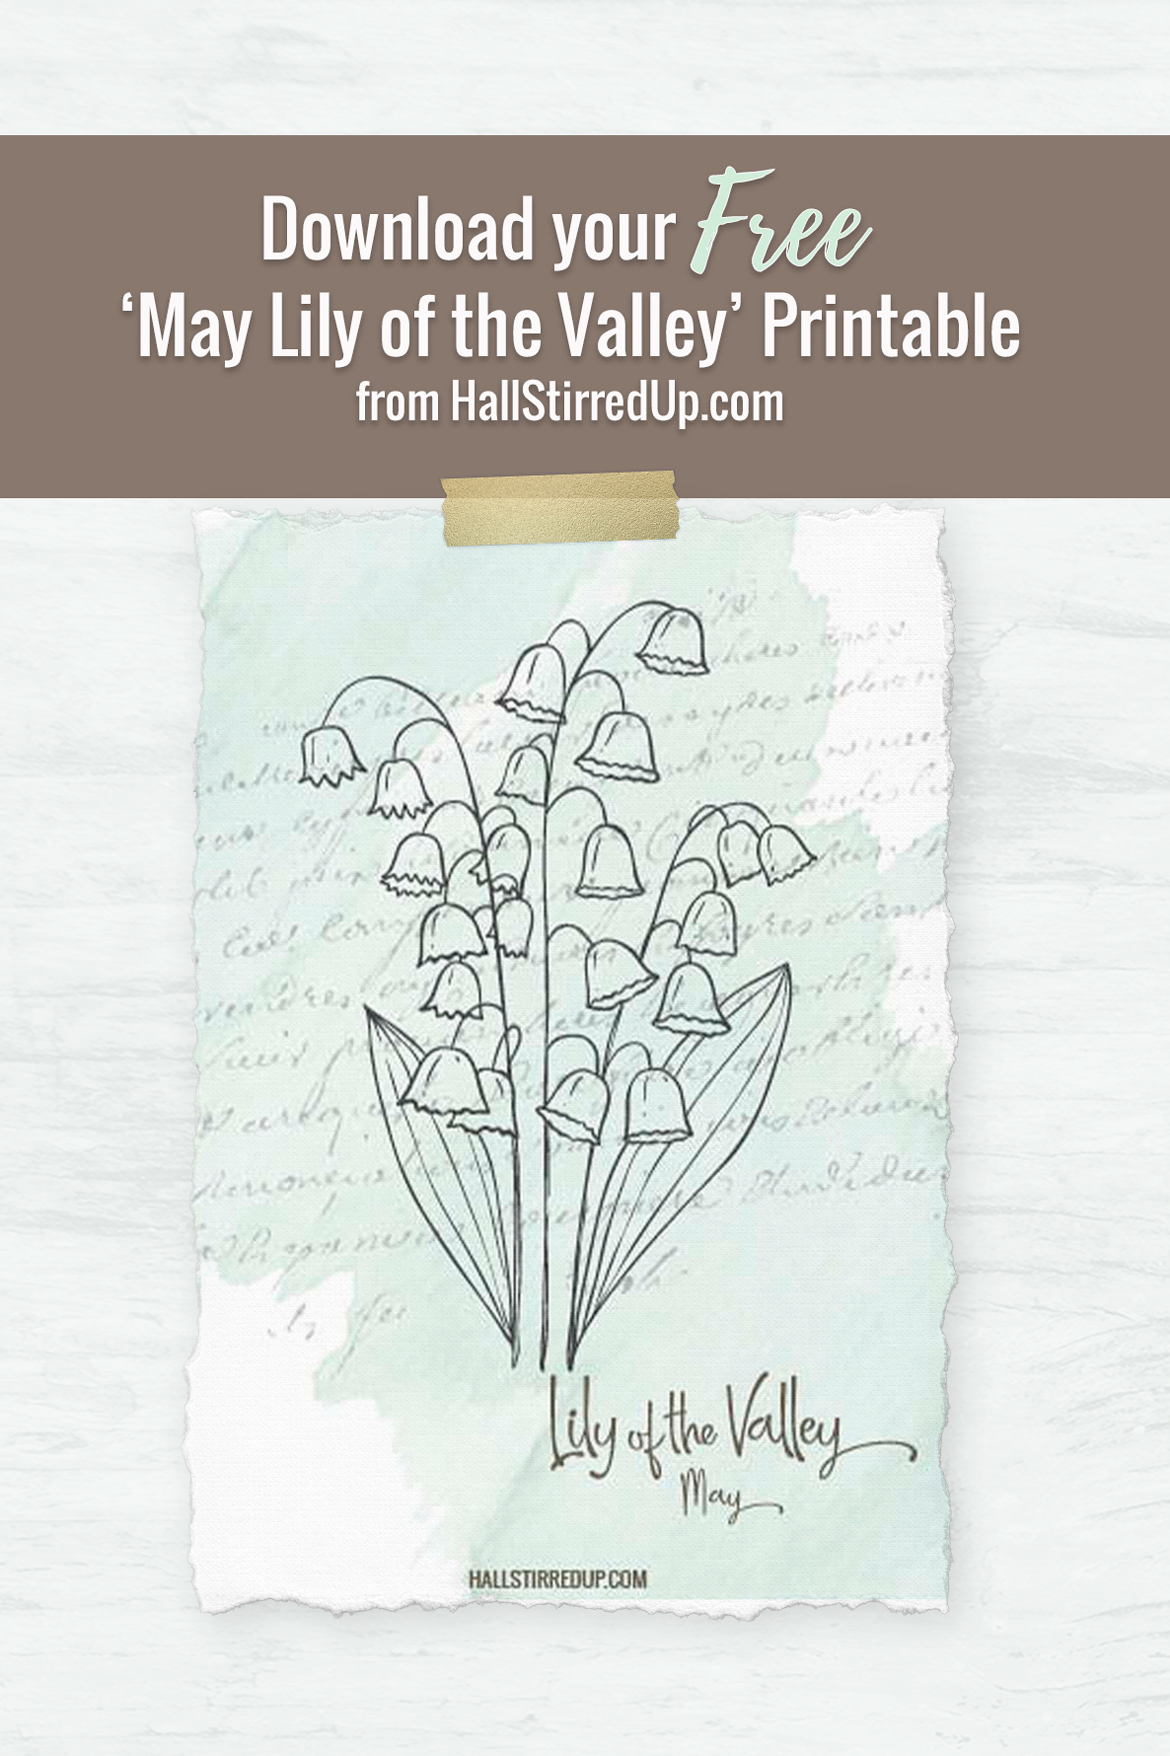 The delicate Lily of the Valley is May's birth flower - with printable